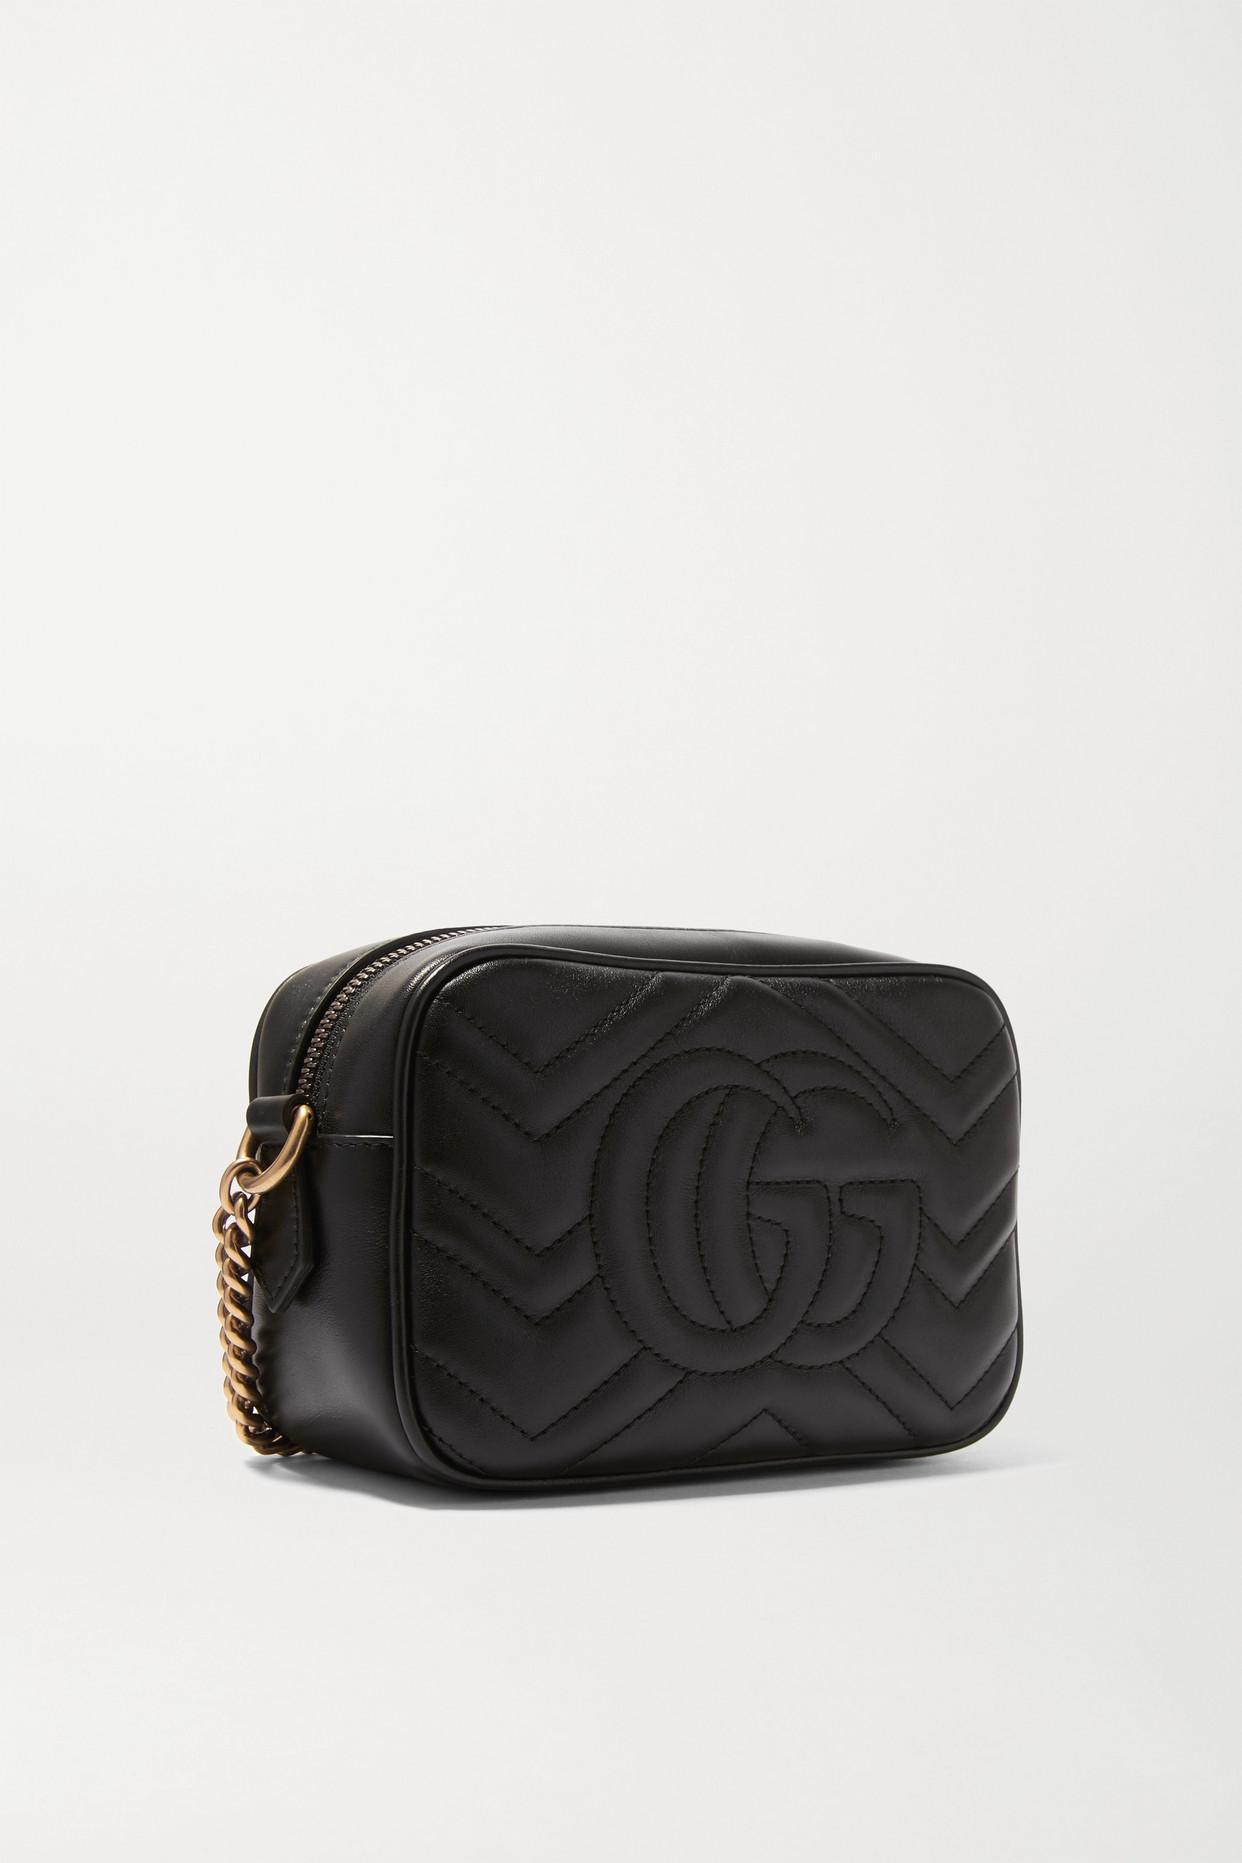 Gucci Gg Marmont Leather Camera Bag - ShopStyle